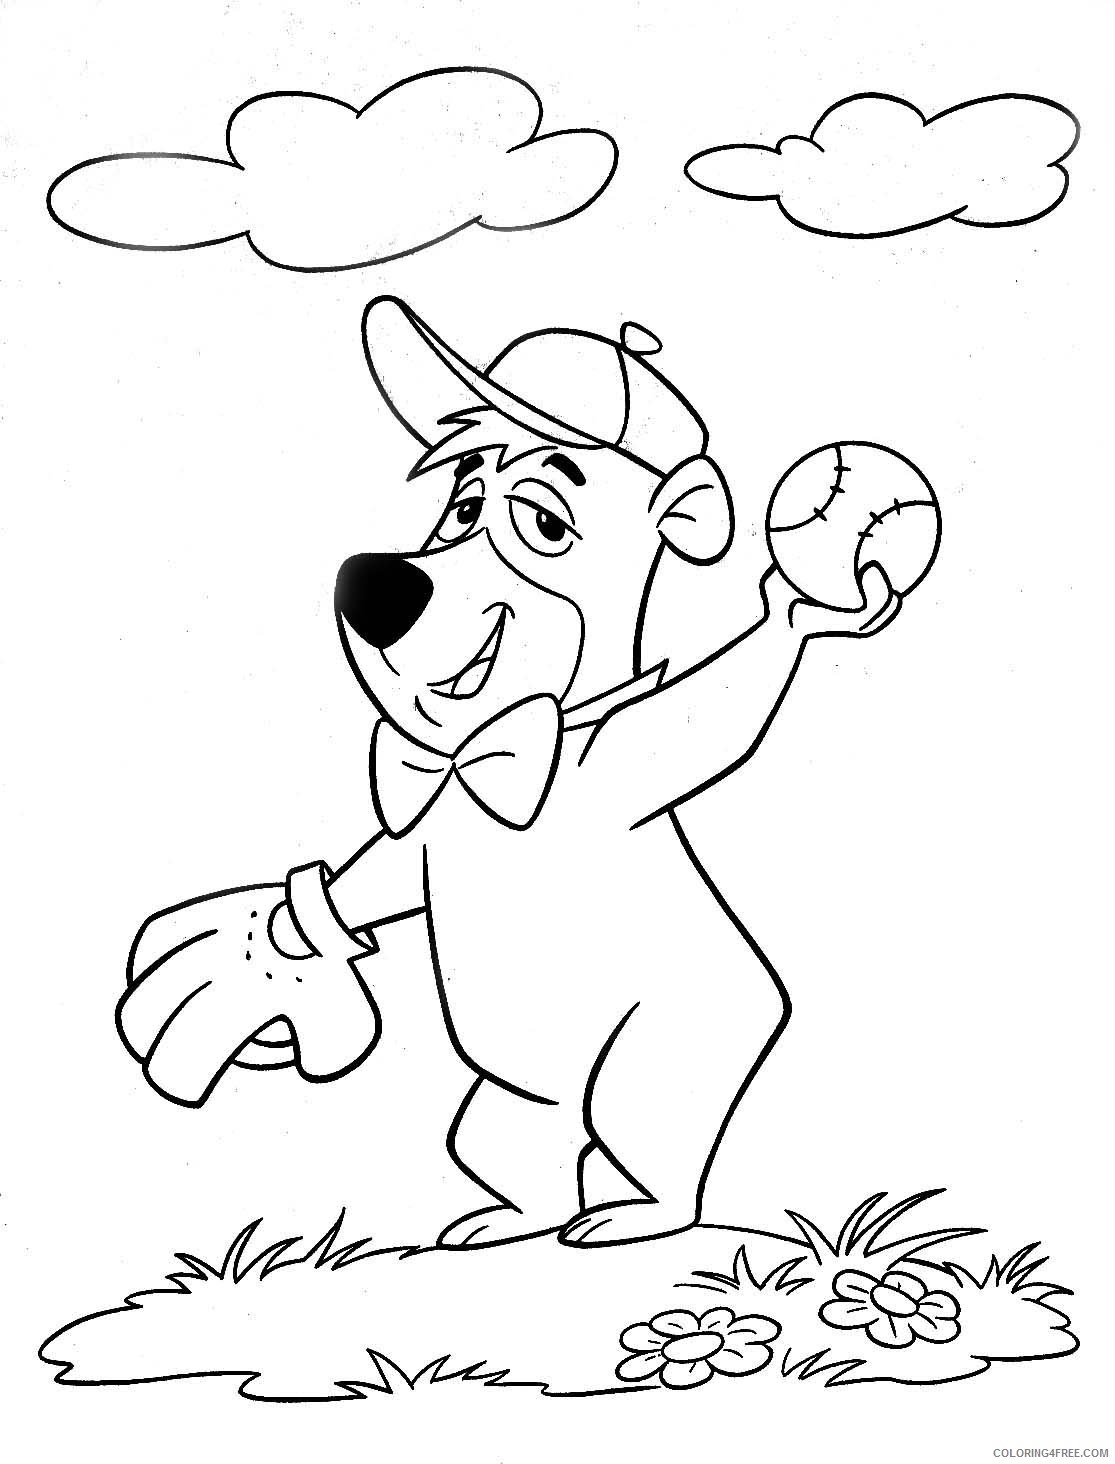 yogi bear boo boo bear coloring pages for kids printable download rzOHSp coloring